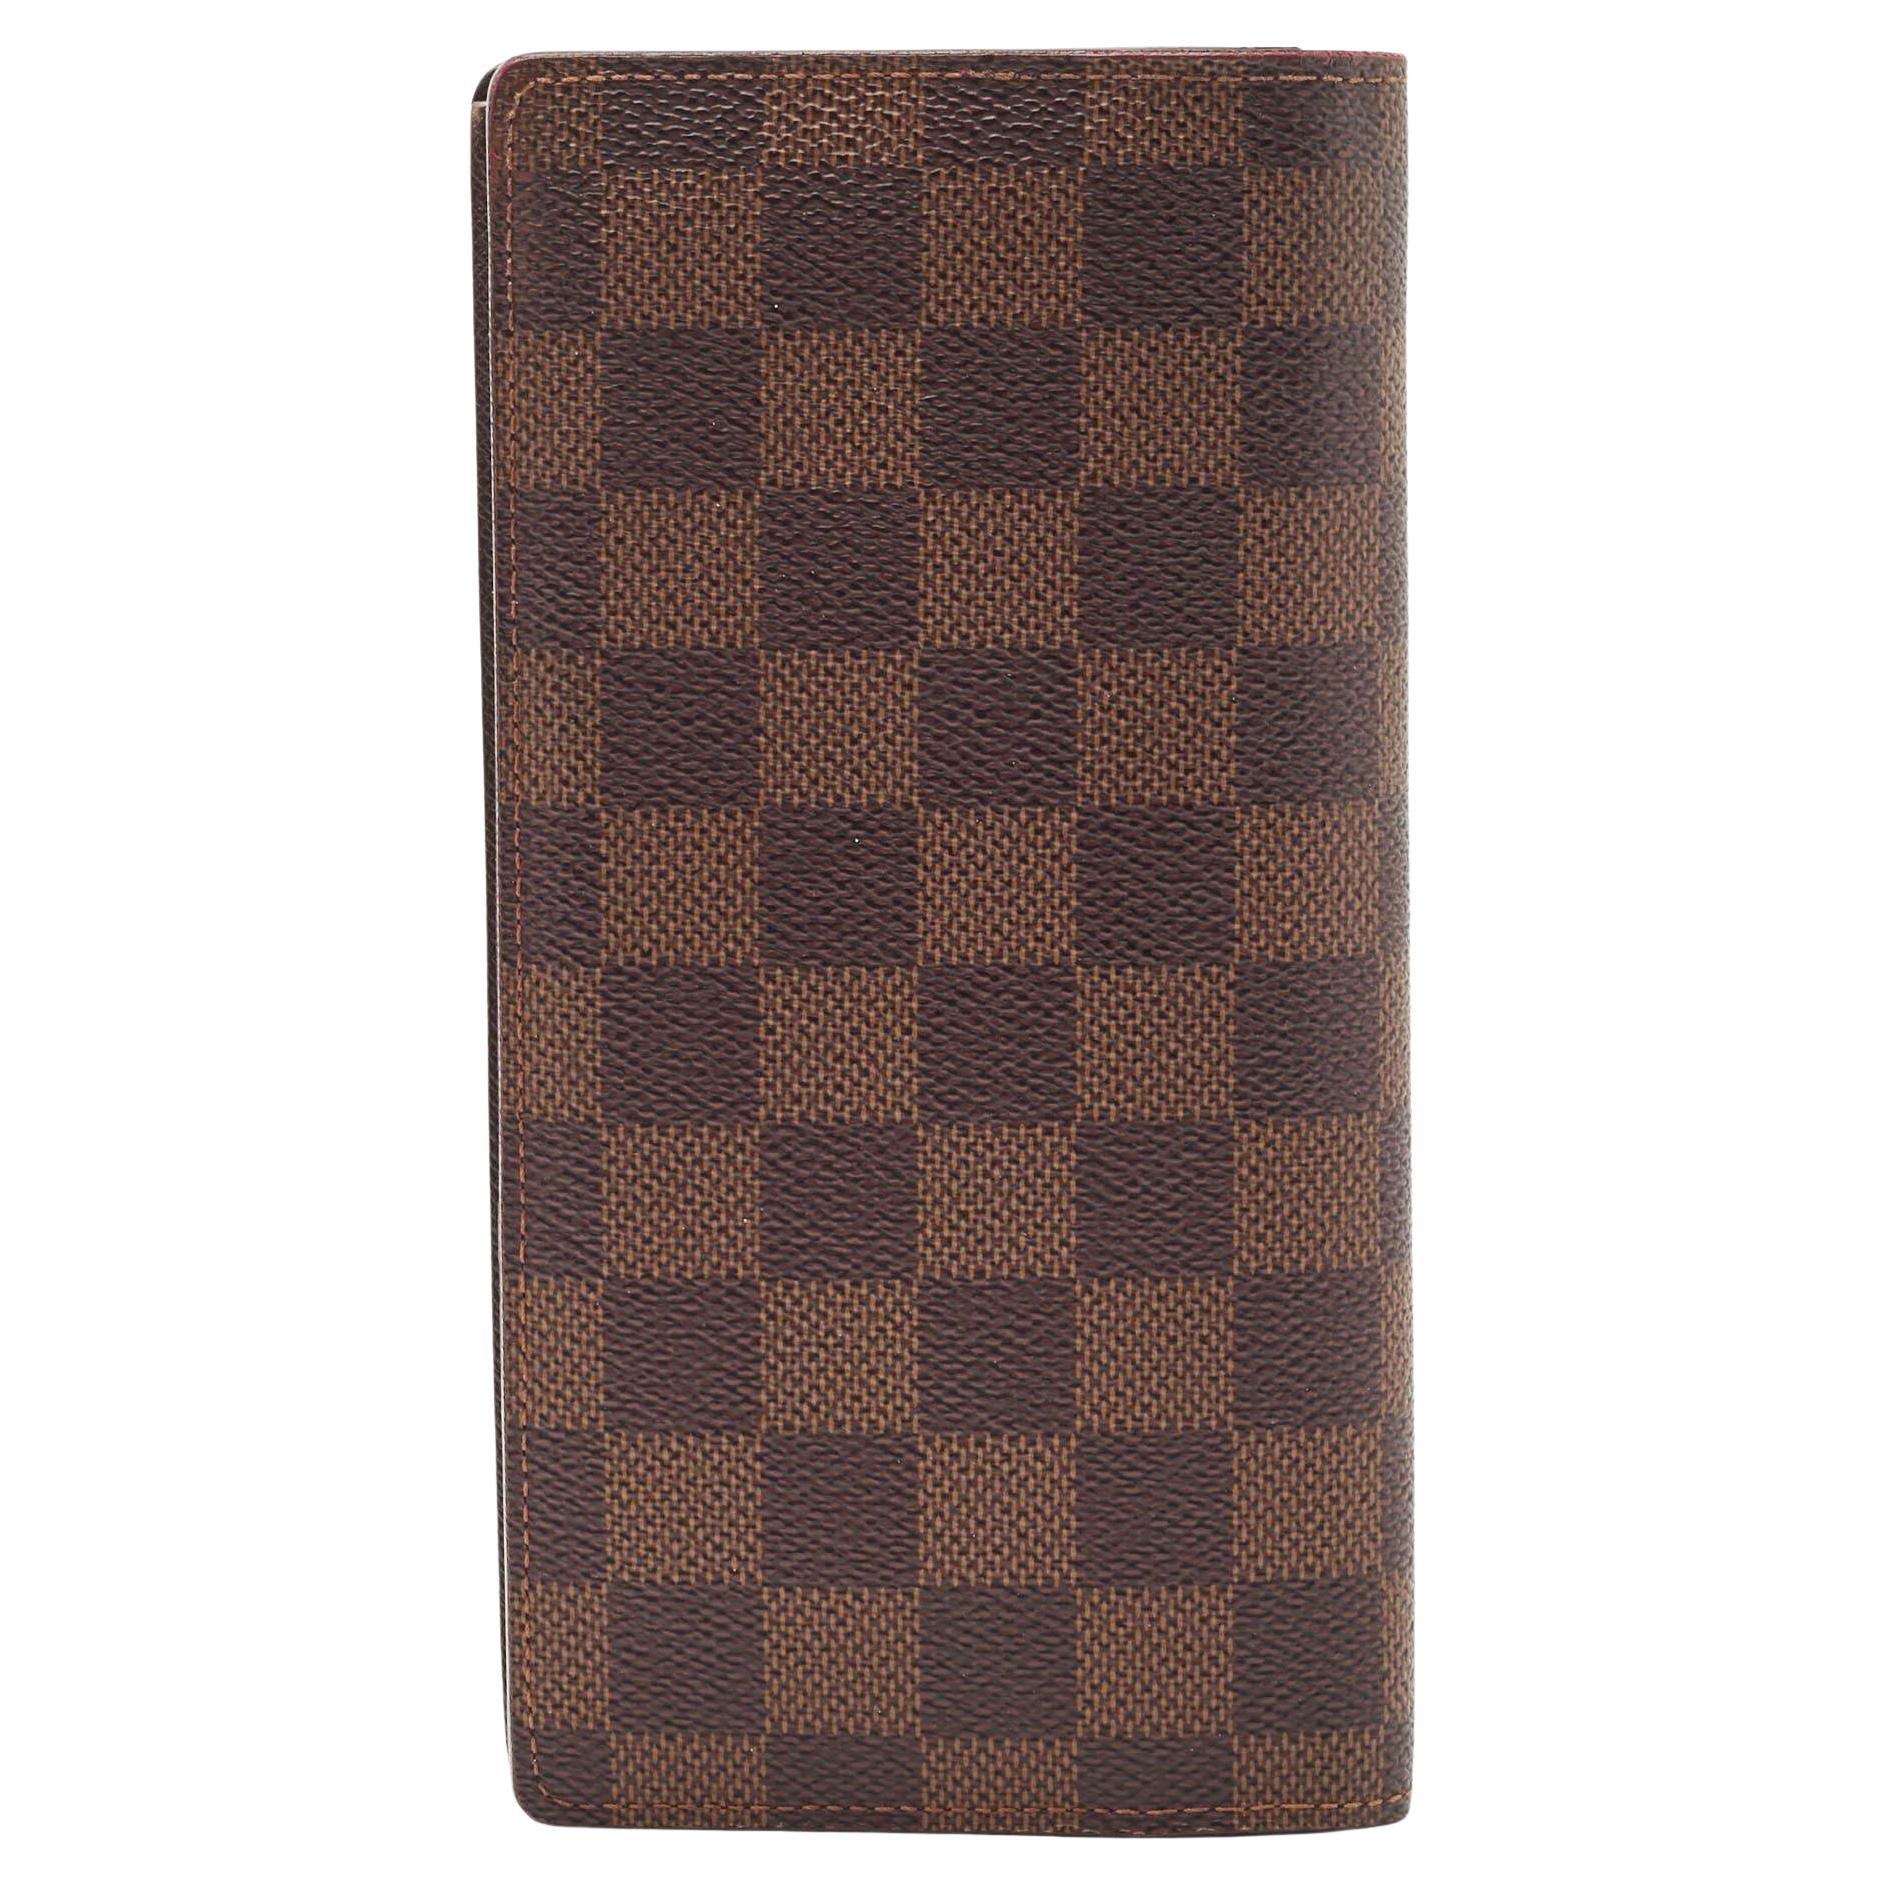 Louis Vuitton Brazza Wallet - 19 For Sale on 1stDibs